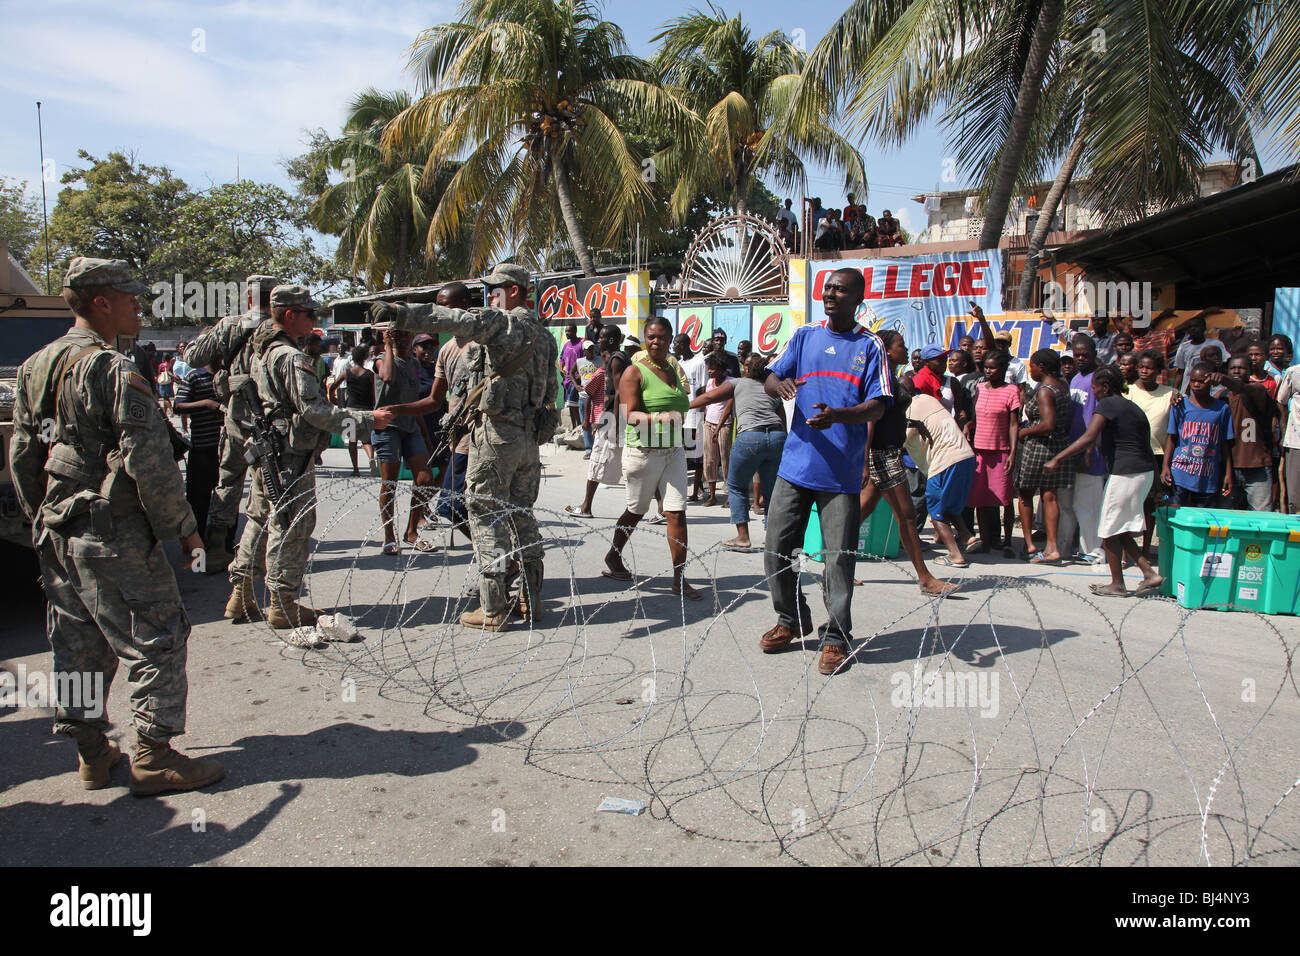 Slodiers of the 82nd Airborne, US Army distribute aid in Port au Prince, Haiti Stock Photo